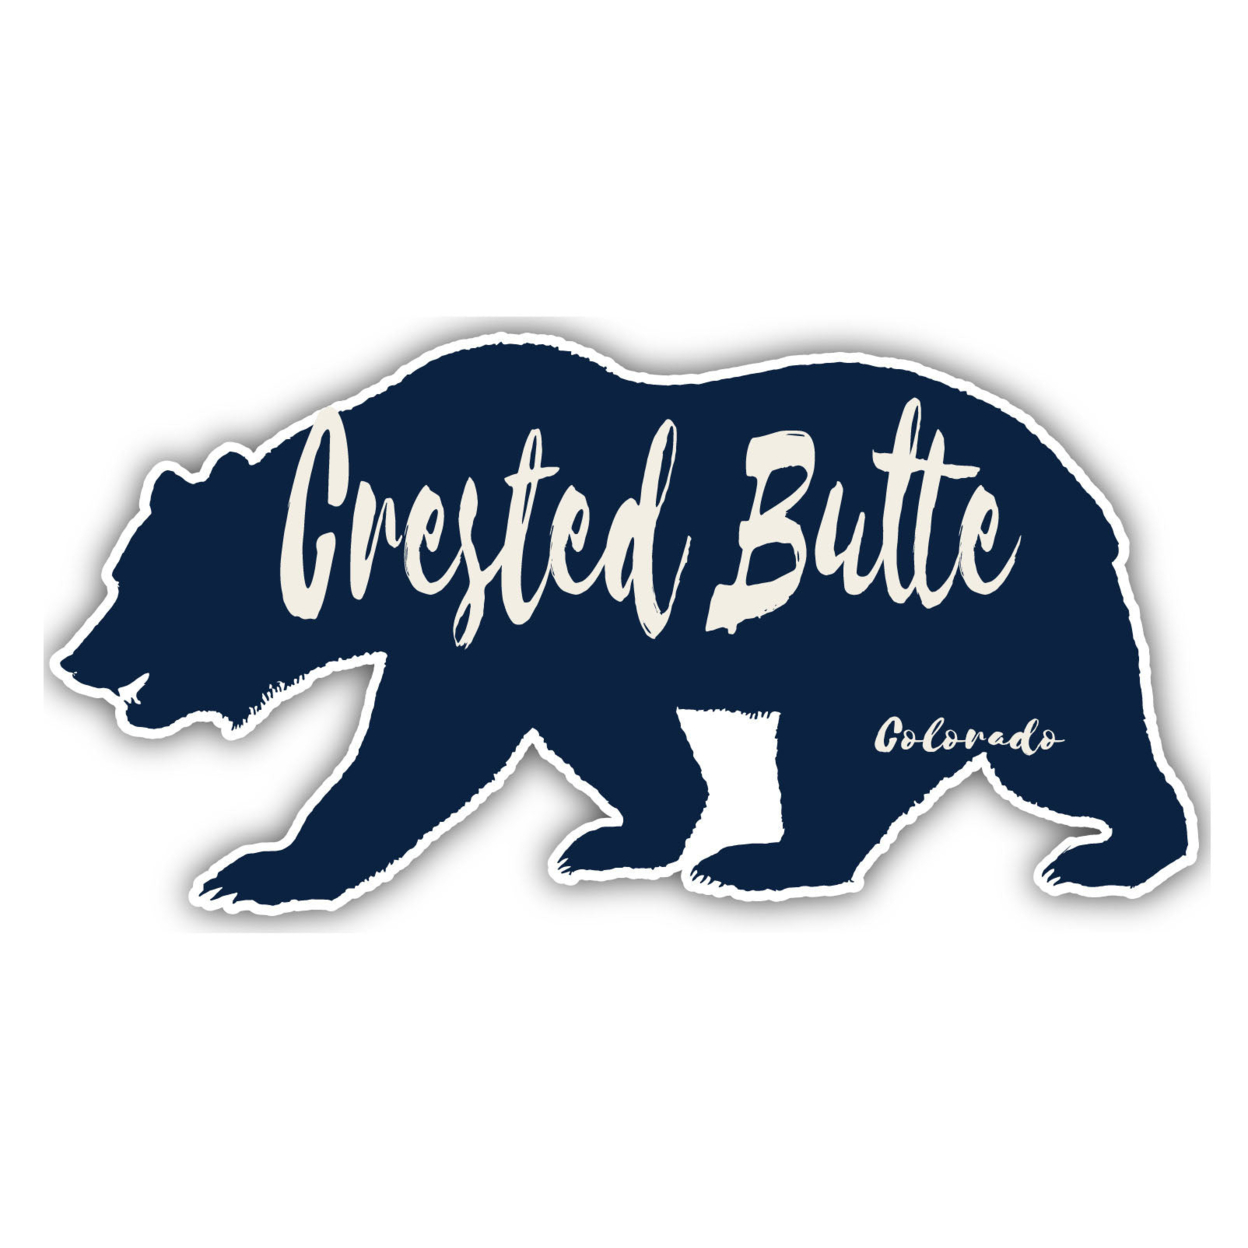 Crested Butte Colorado Souvenir Decorative Stickers (Choose Theme And Size) - 4-Pack, 8-Inch, Bear